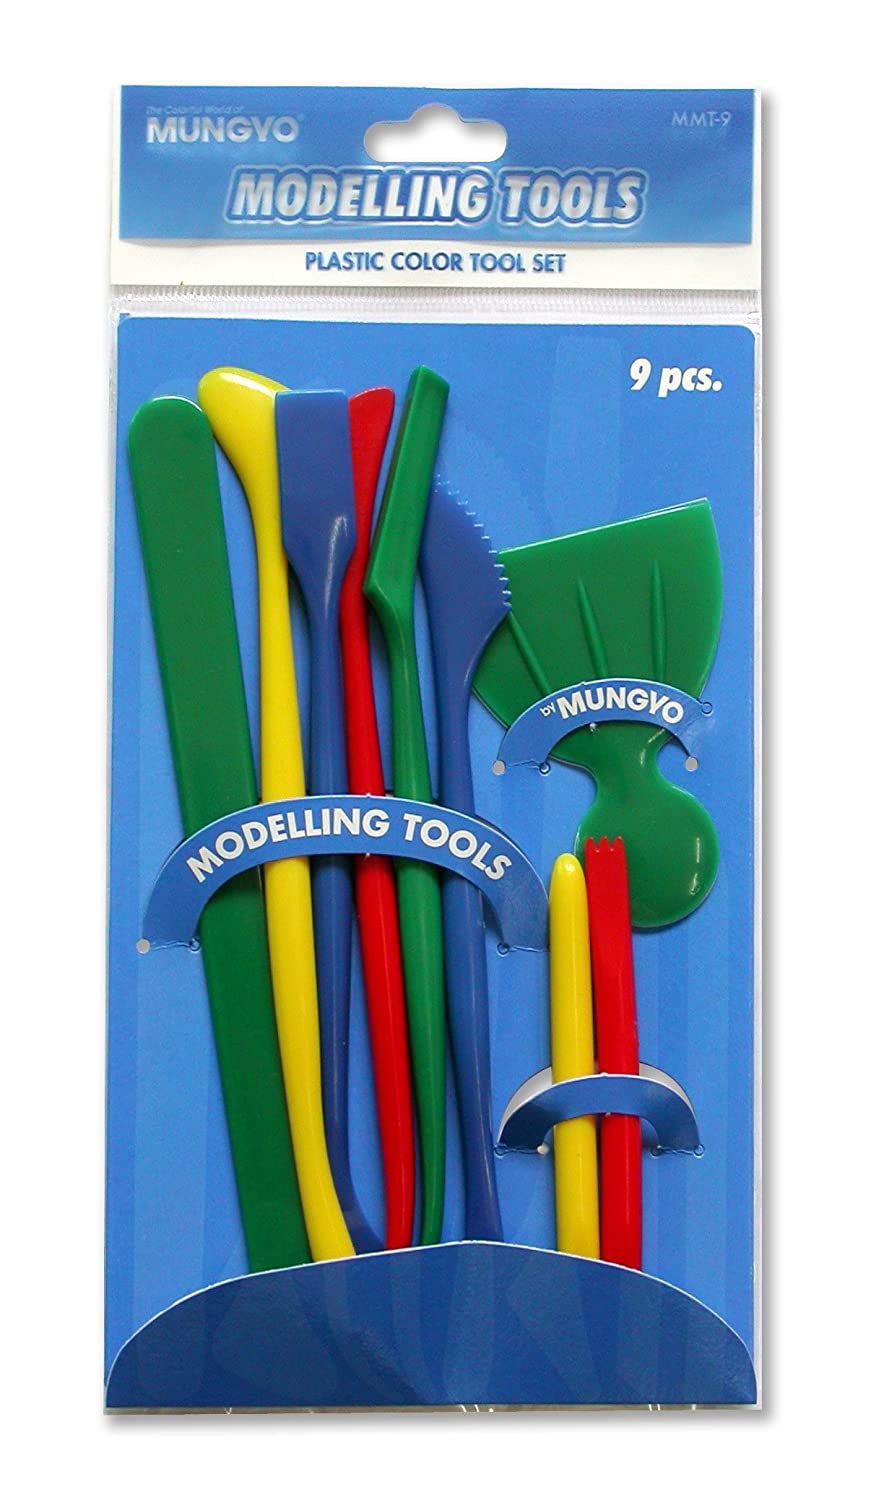 Mungyo Clay Modelling Tools (MMT-9)